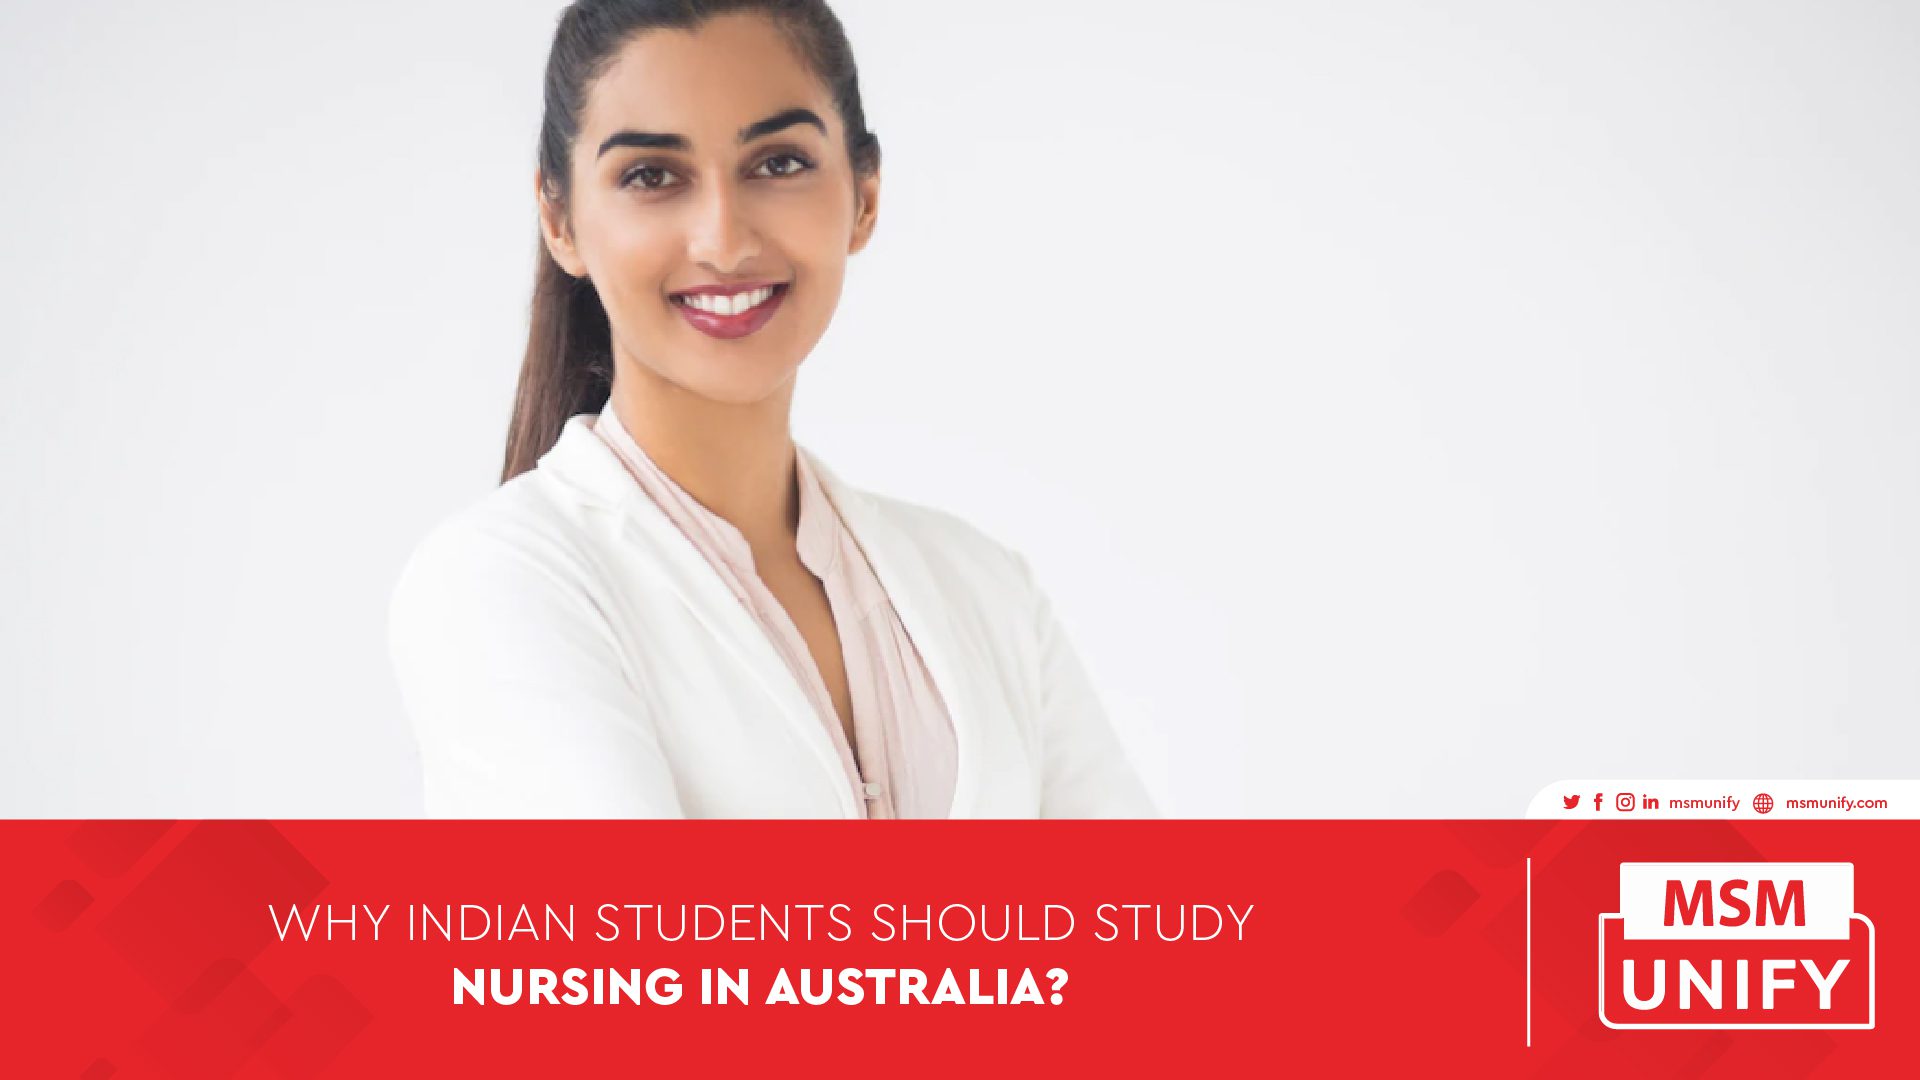 010623 MSM Unify Why Indian students should Study Nursing In Australia 01